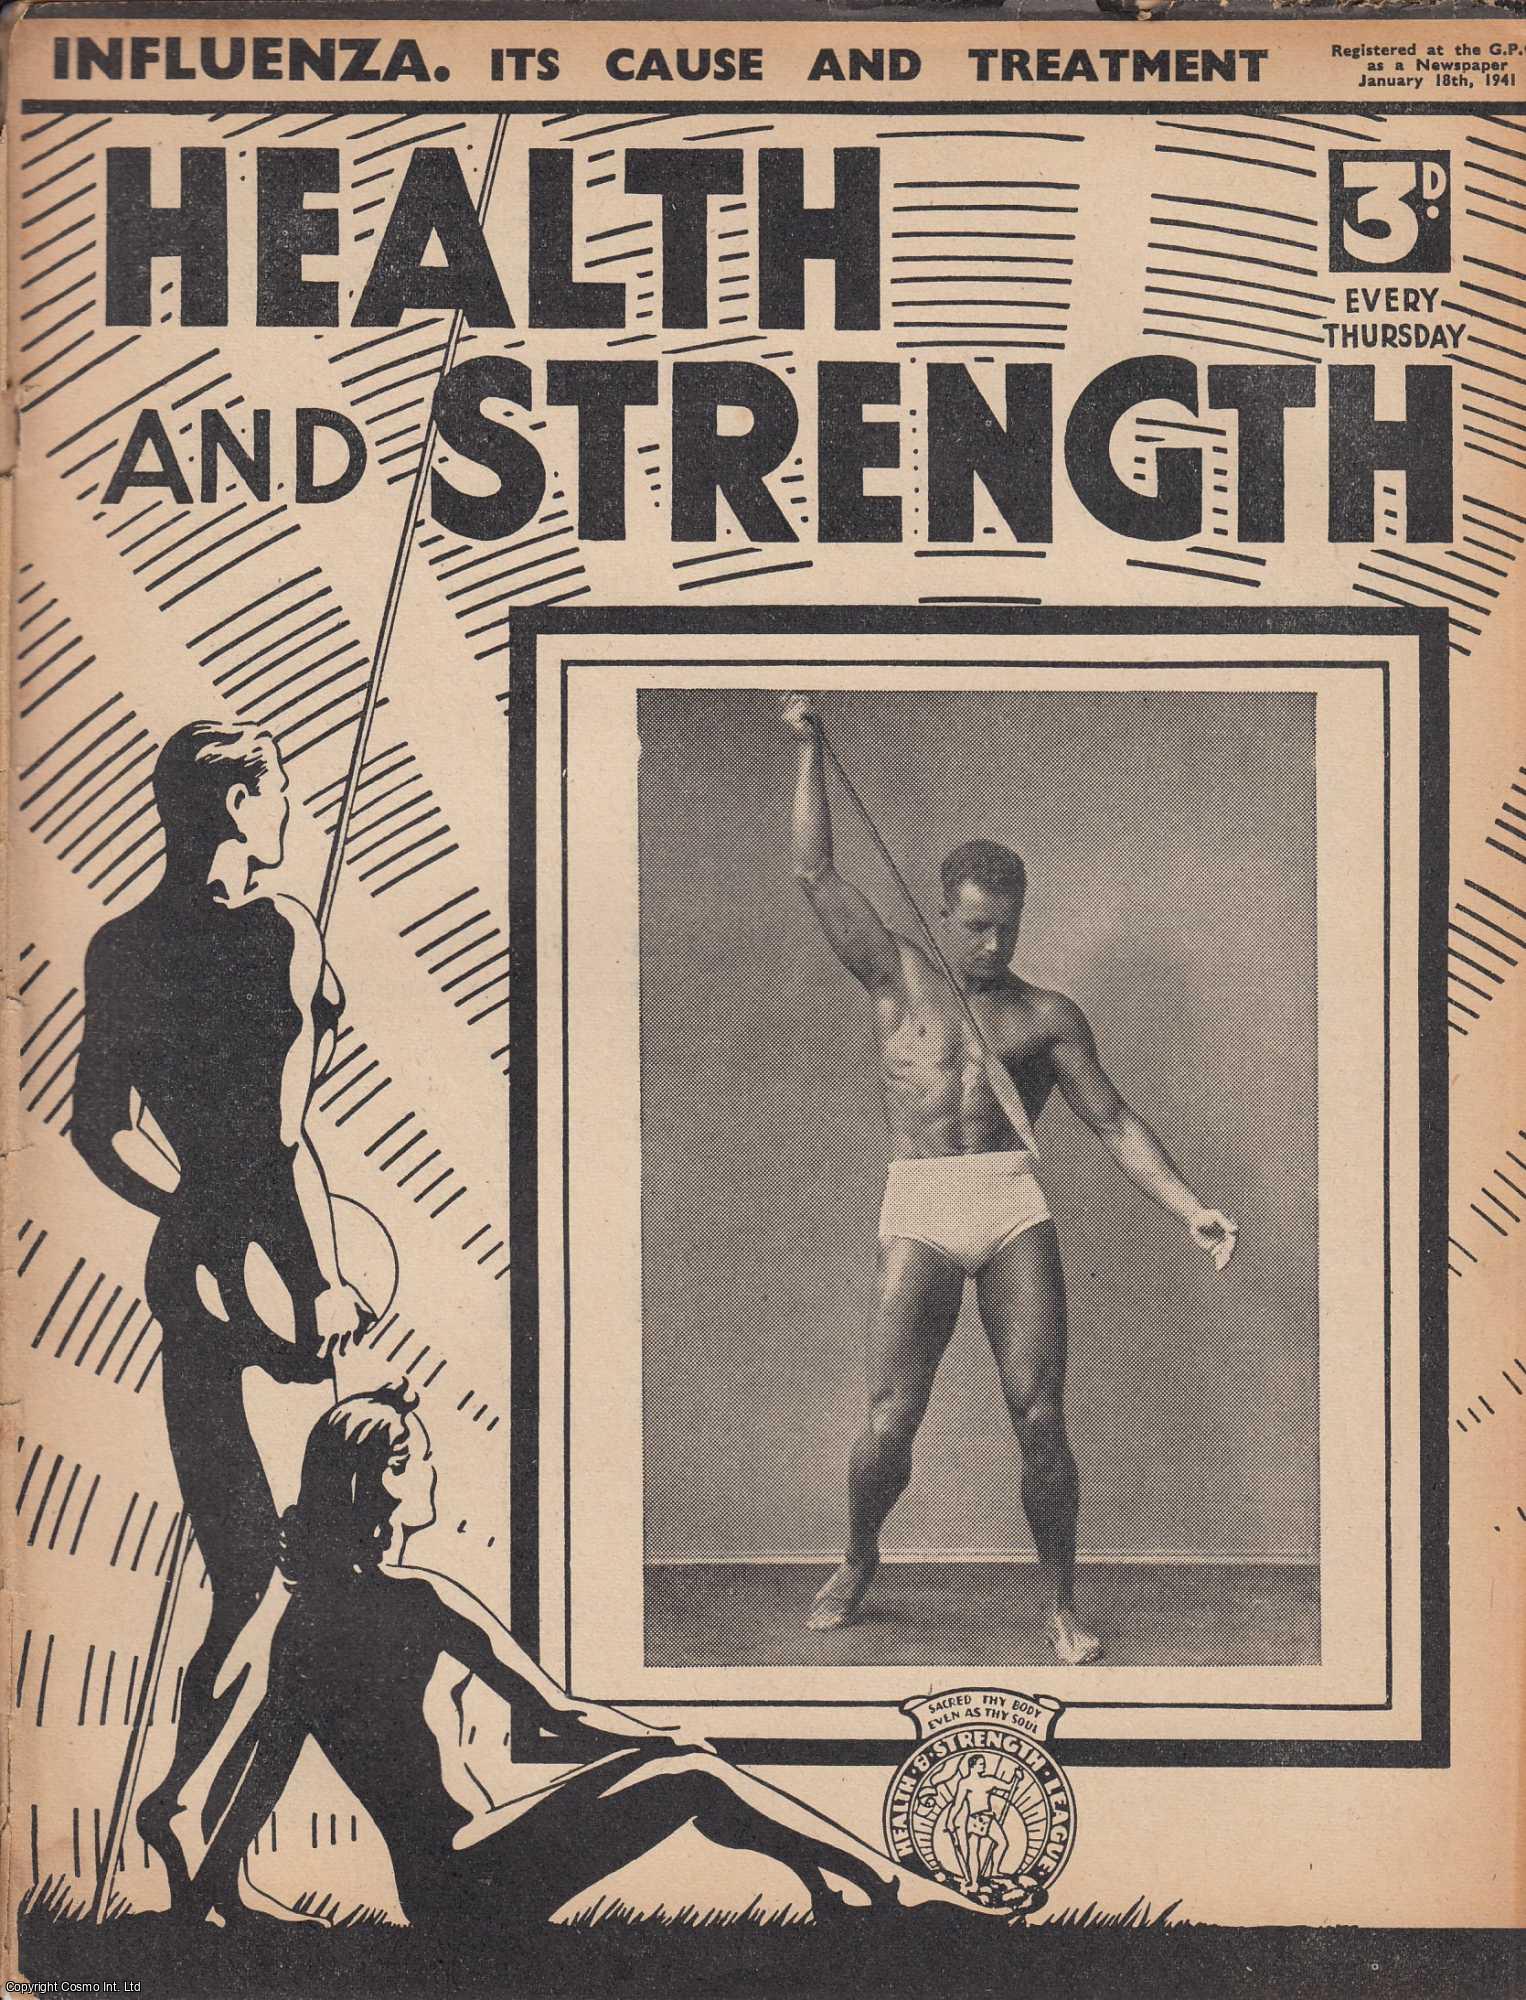 Body Building - Influenza. Its Cause and Treatment. Health and Strength Magazine, January 18, 1941. Vol LXVIII, No 3.